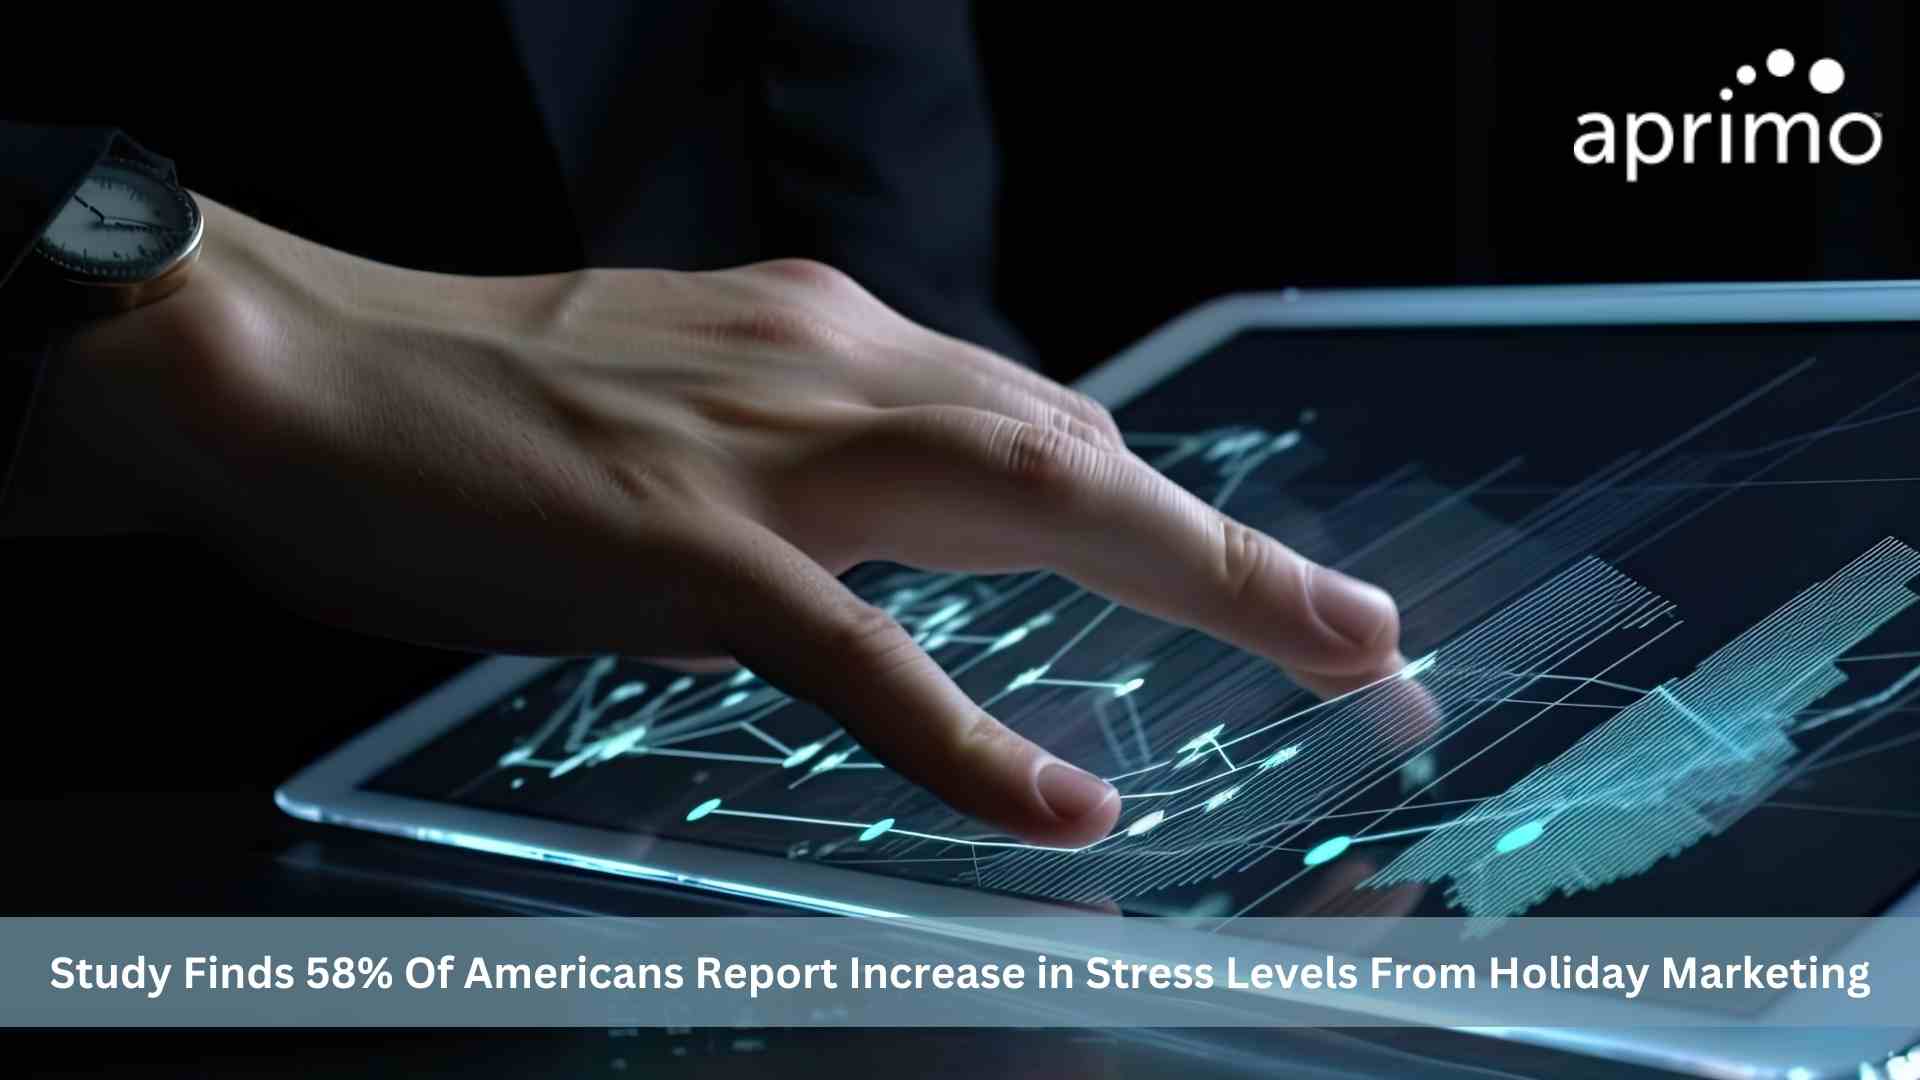 58% of Americans Report Increase in Stress Levels from Holiday Marketing, Aprimo Study Finds